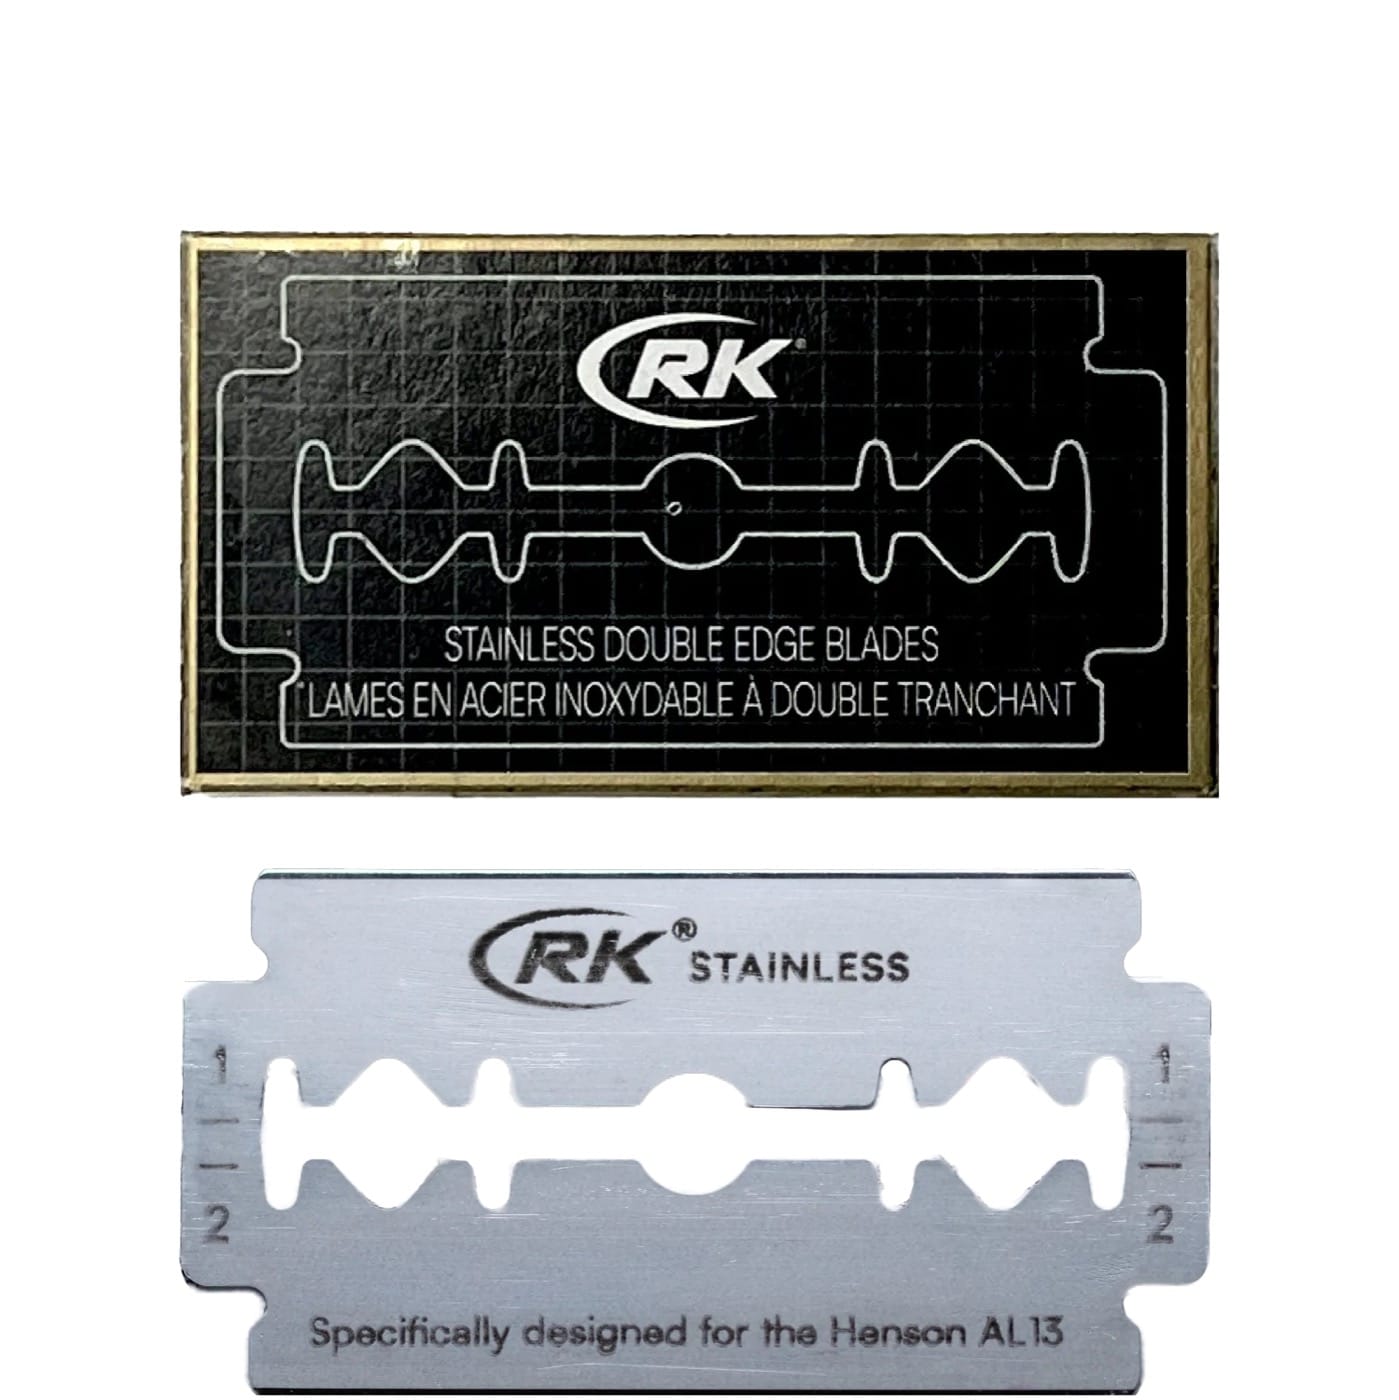 RK Stainless Double Edge blades - 1.1 - DEB-RK-STAINLESS